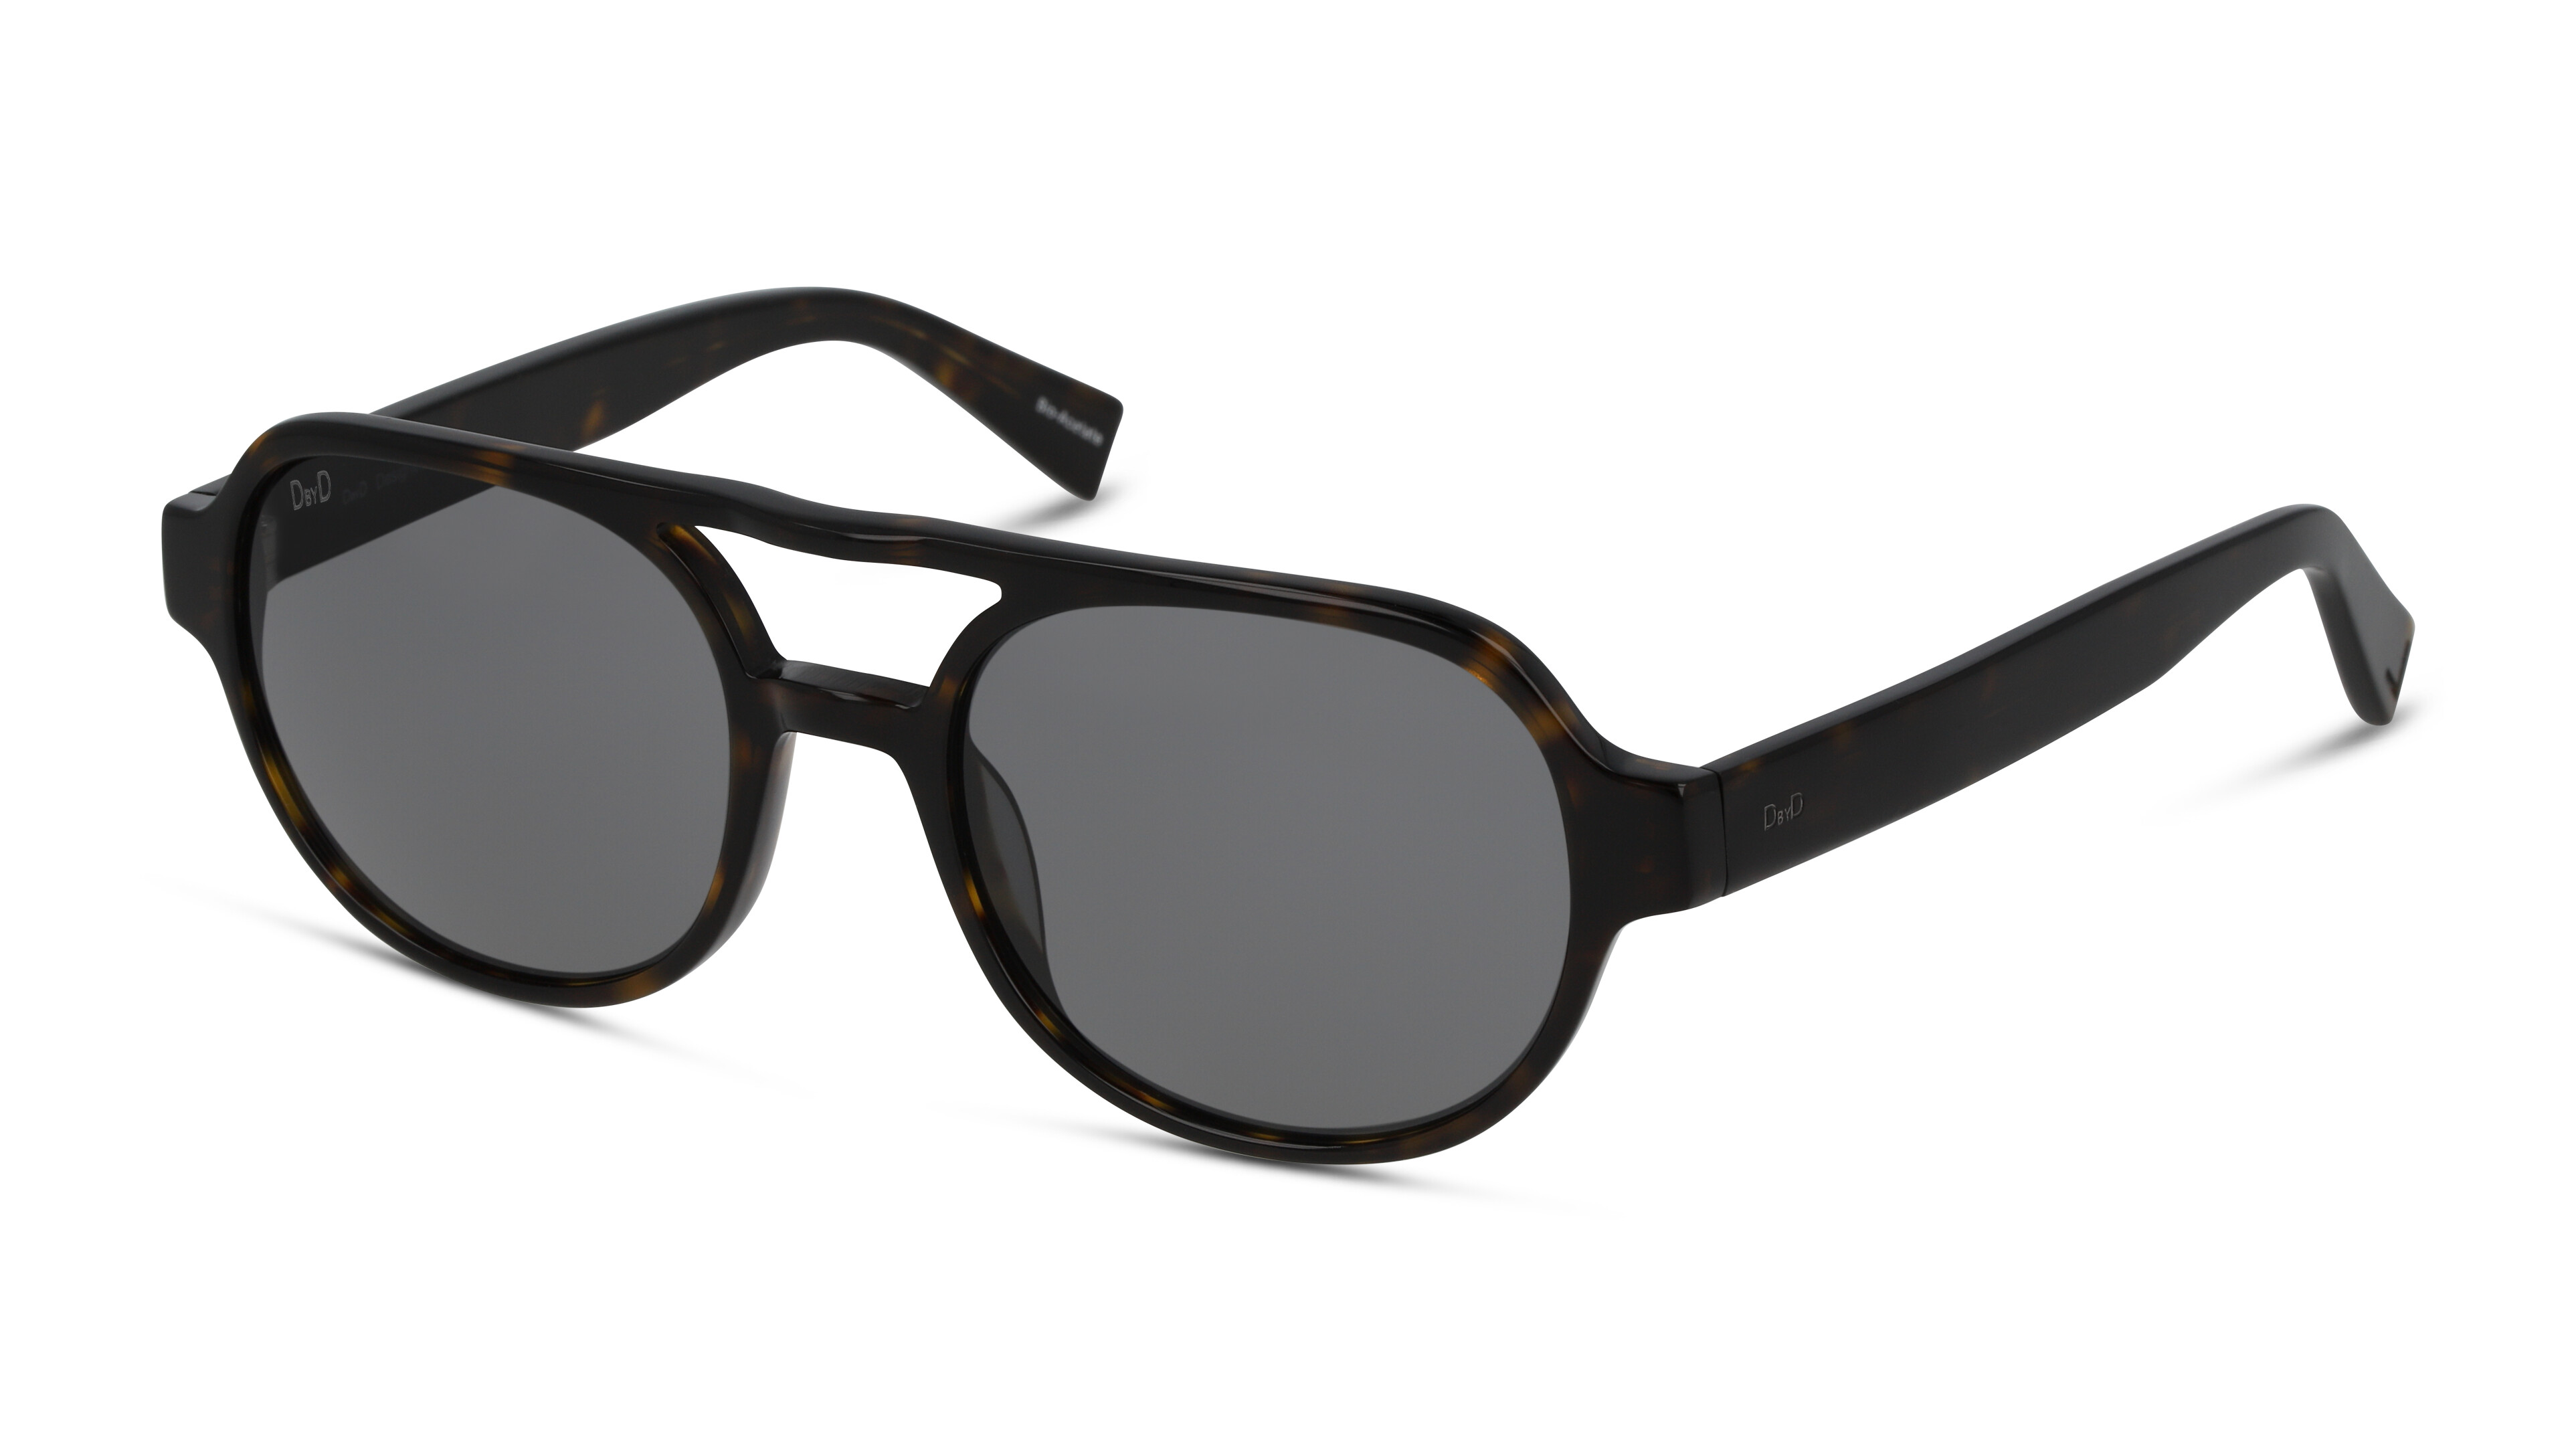 [products.image.angle_left01] DbyD DBSM5004 HHG0 Sonnenbrille